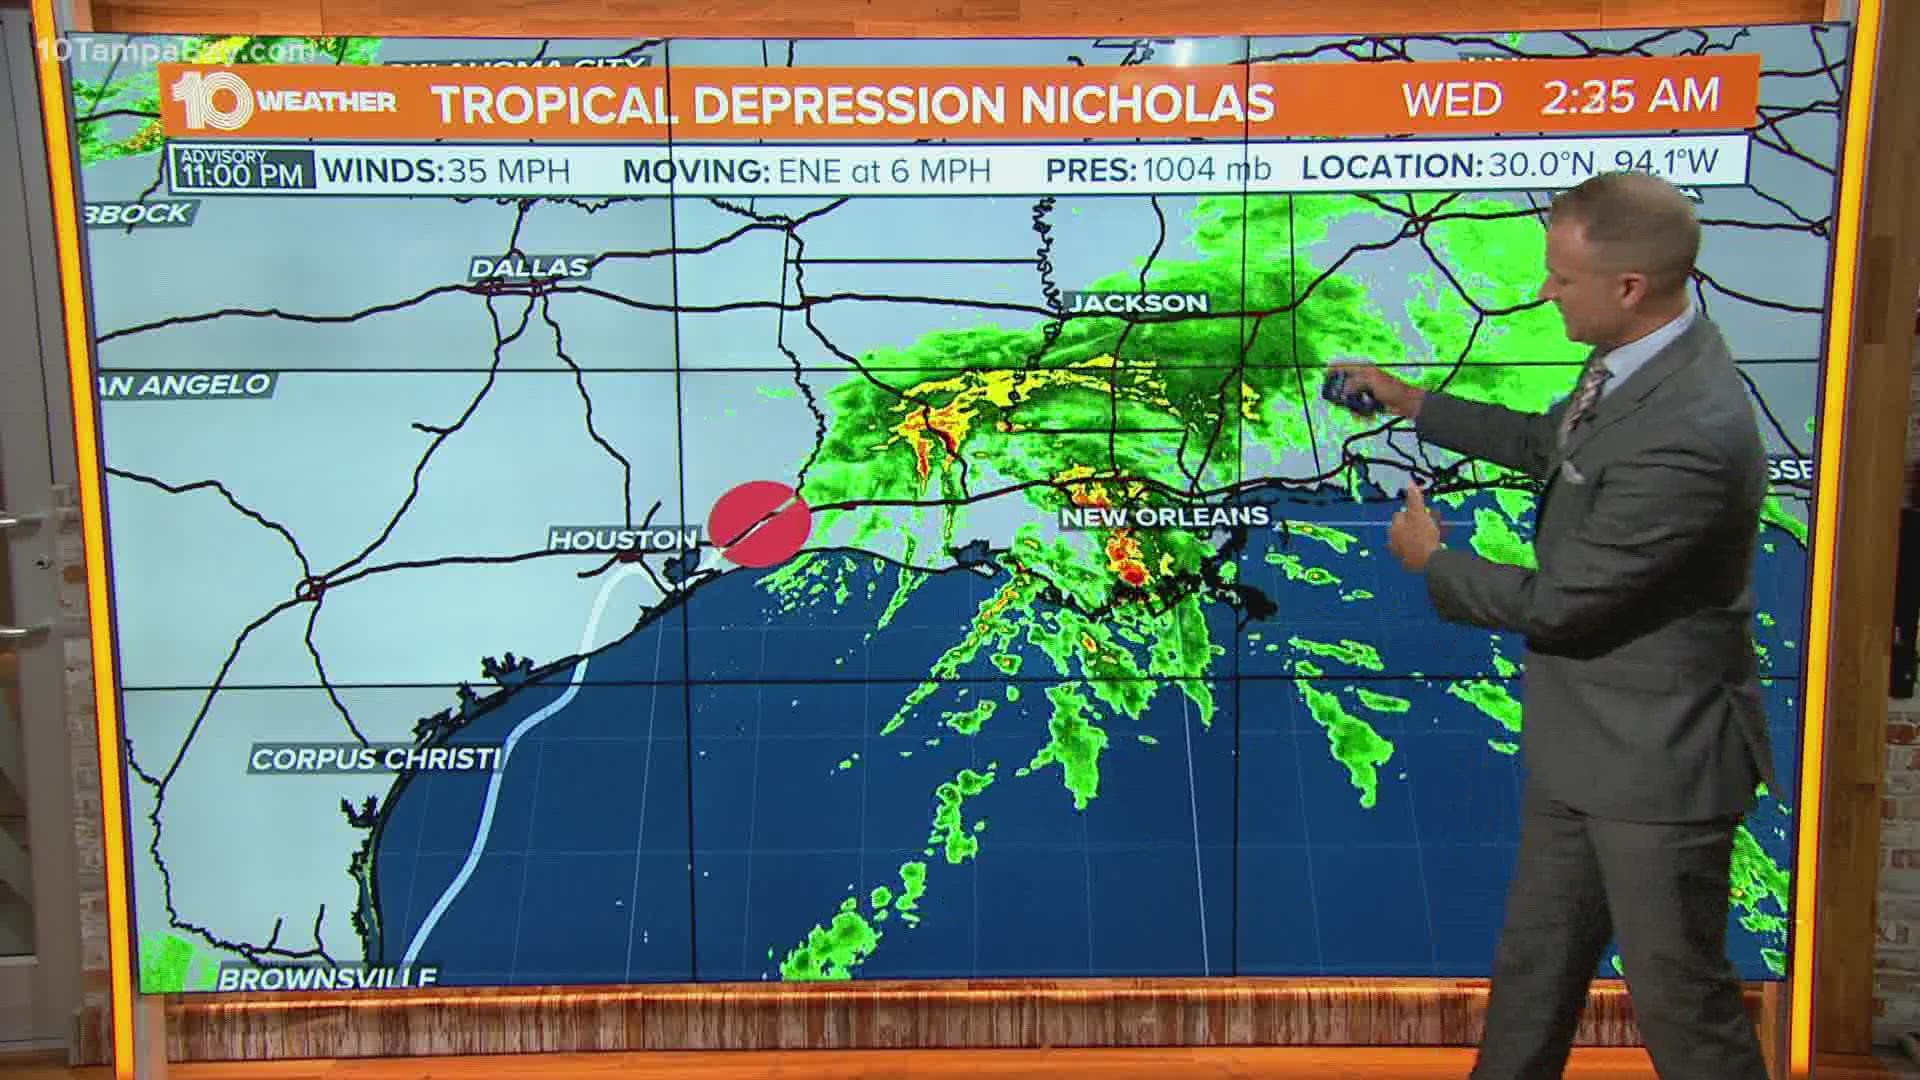 Forecasters said Nicholas could potentially stall over storm-battered Louisiana and bring life-threatening floods across the Deep South over the coming days.